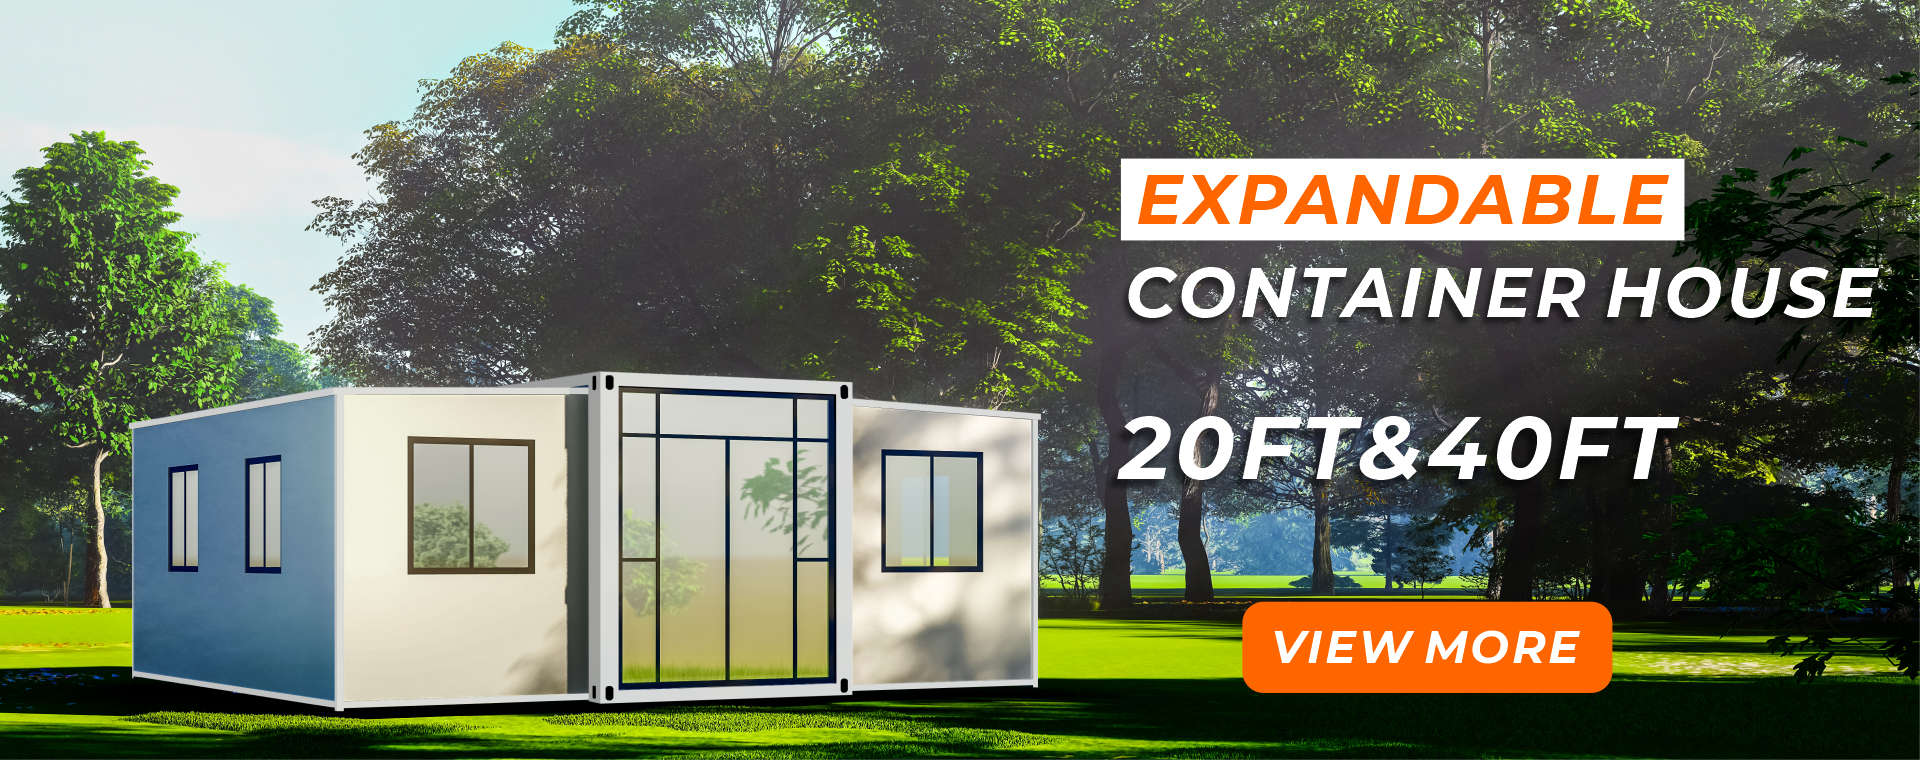 Expandable container house, luxury and modern